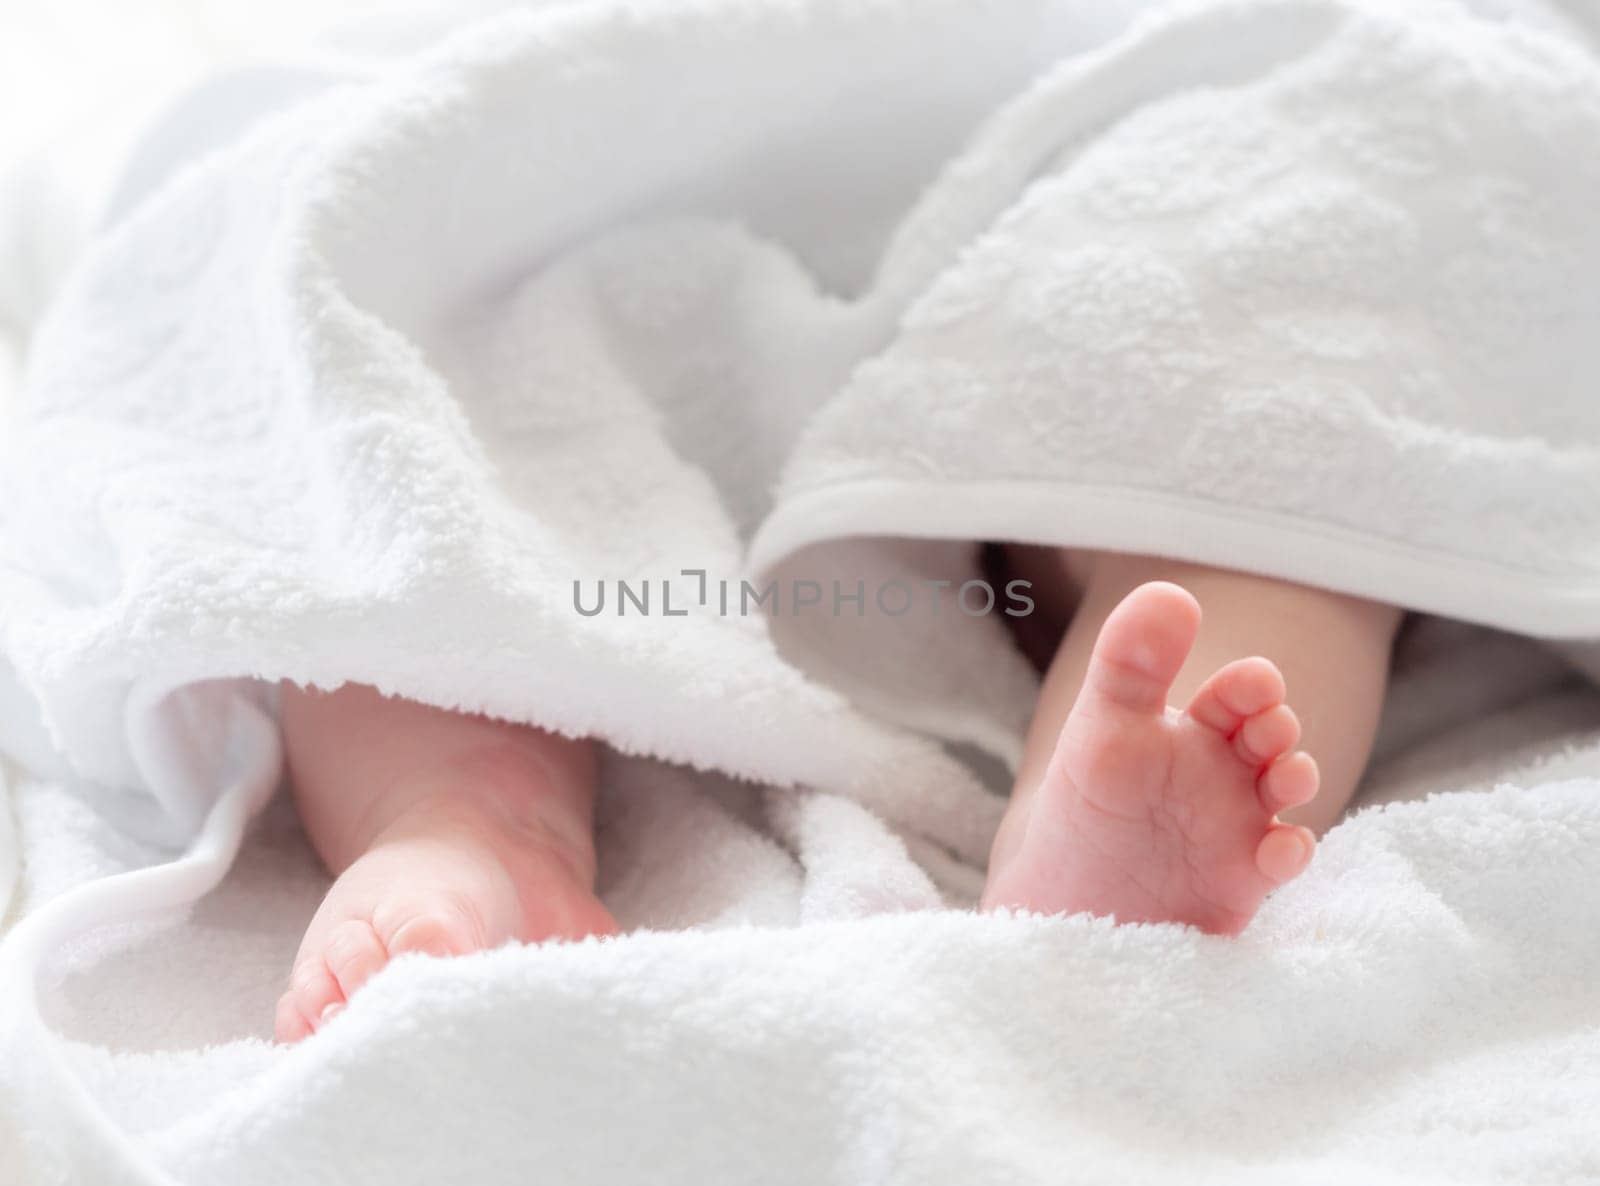 The tender feet and legs of a freshly bathed infant child peek from a plush white towel, capturing moments of innocence and warmth